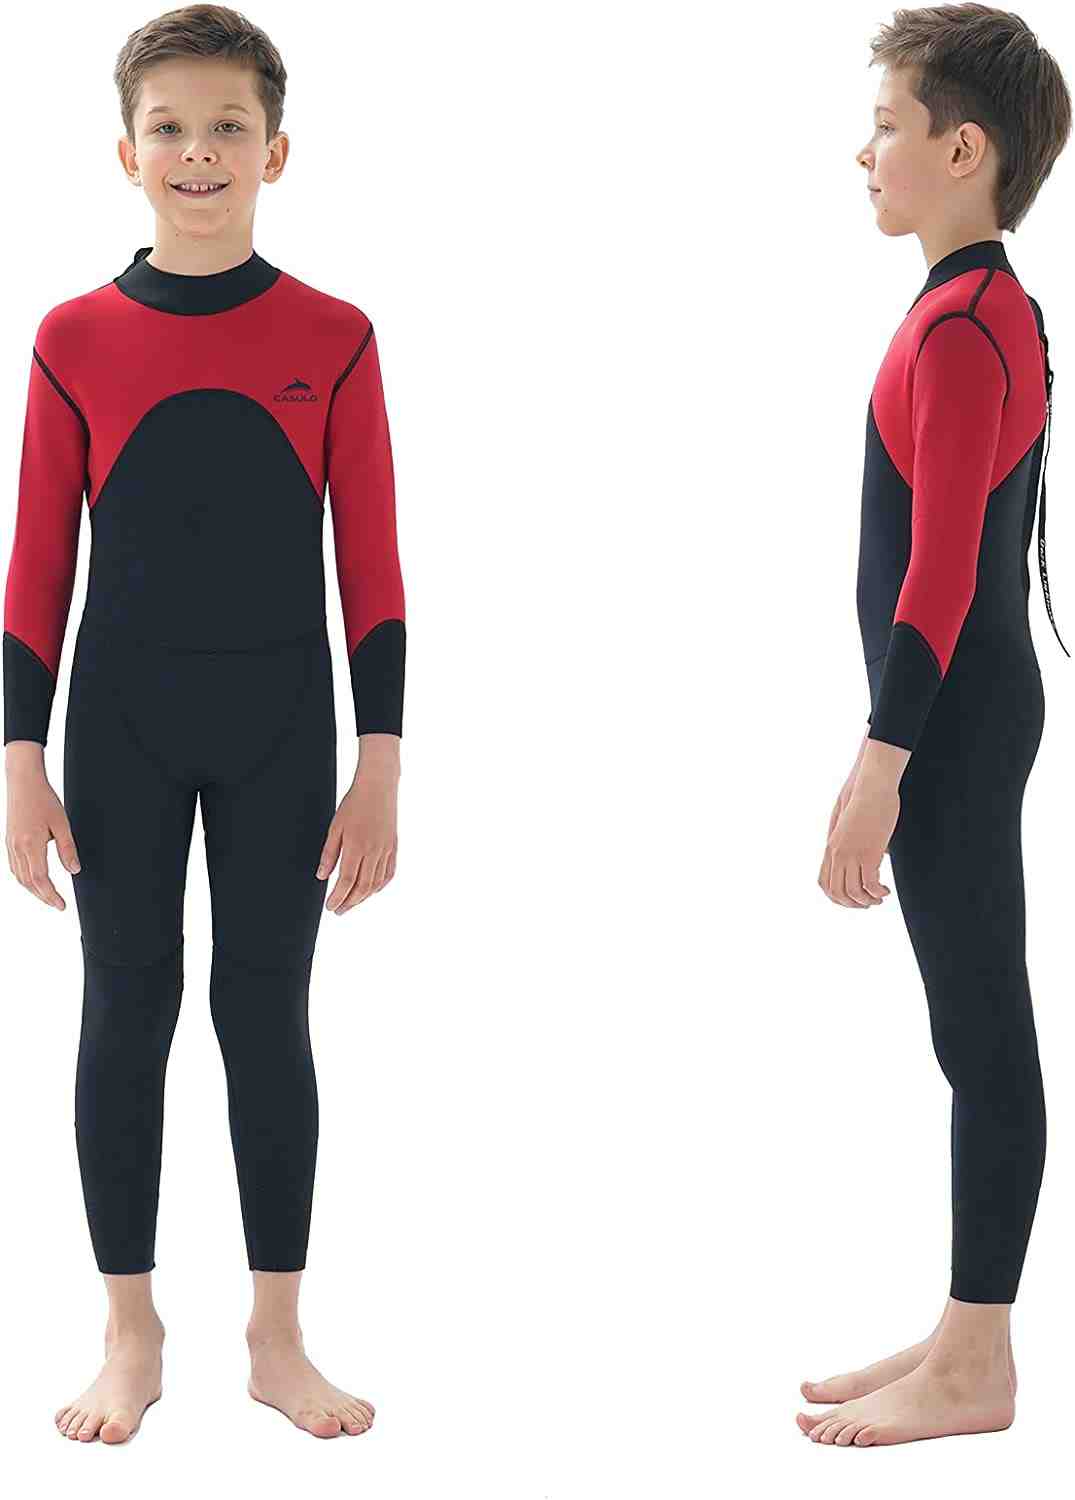 How cold of water can you swim in with a wetsuit?